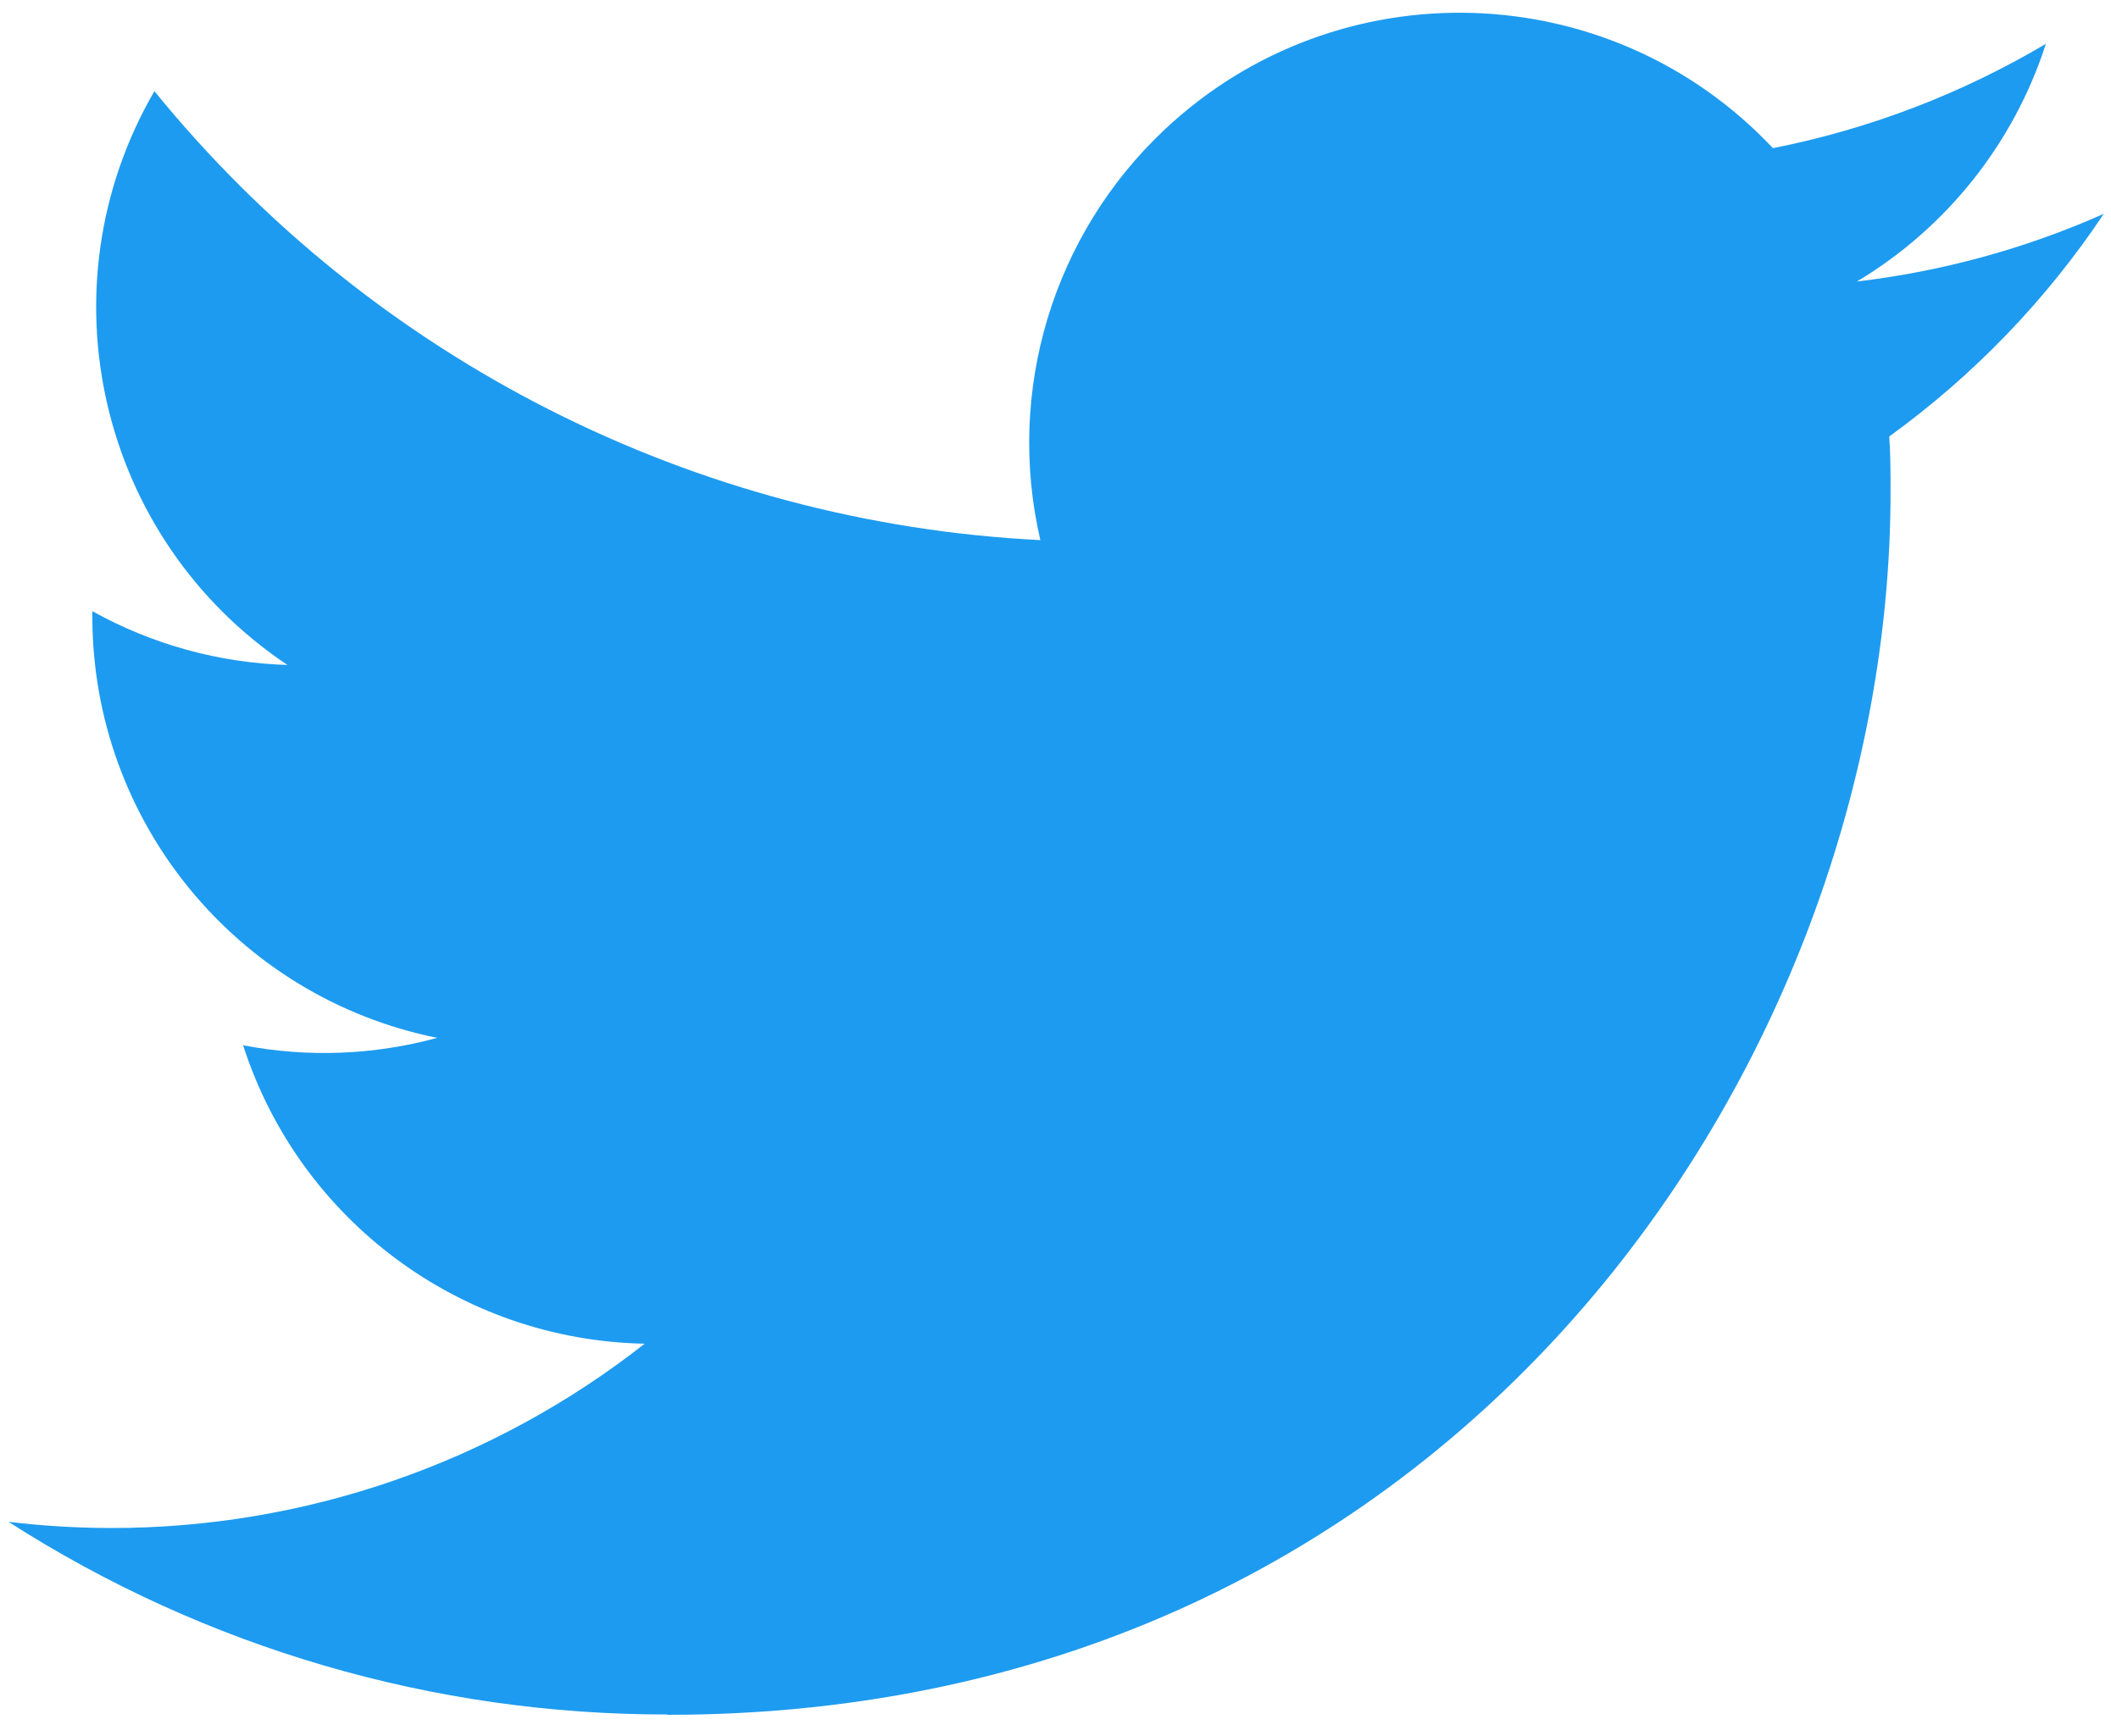 [IMAGE ID: the Twitter website logo. END ID]